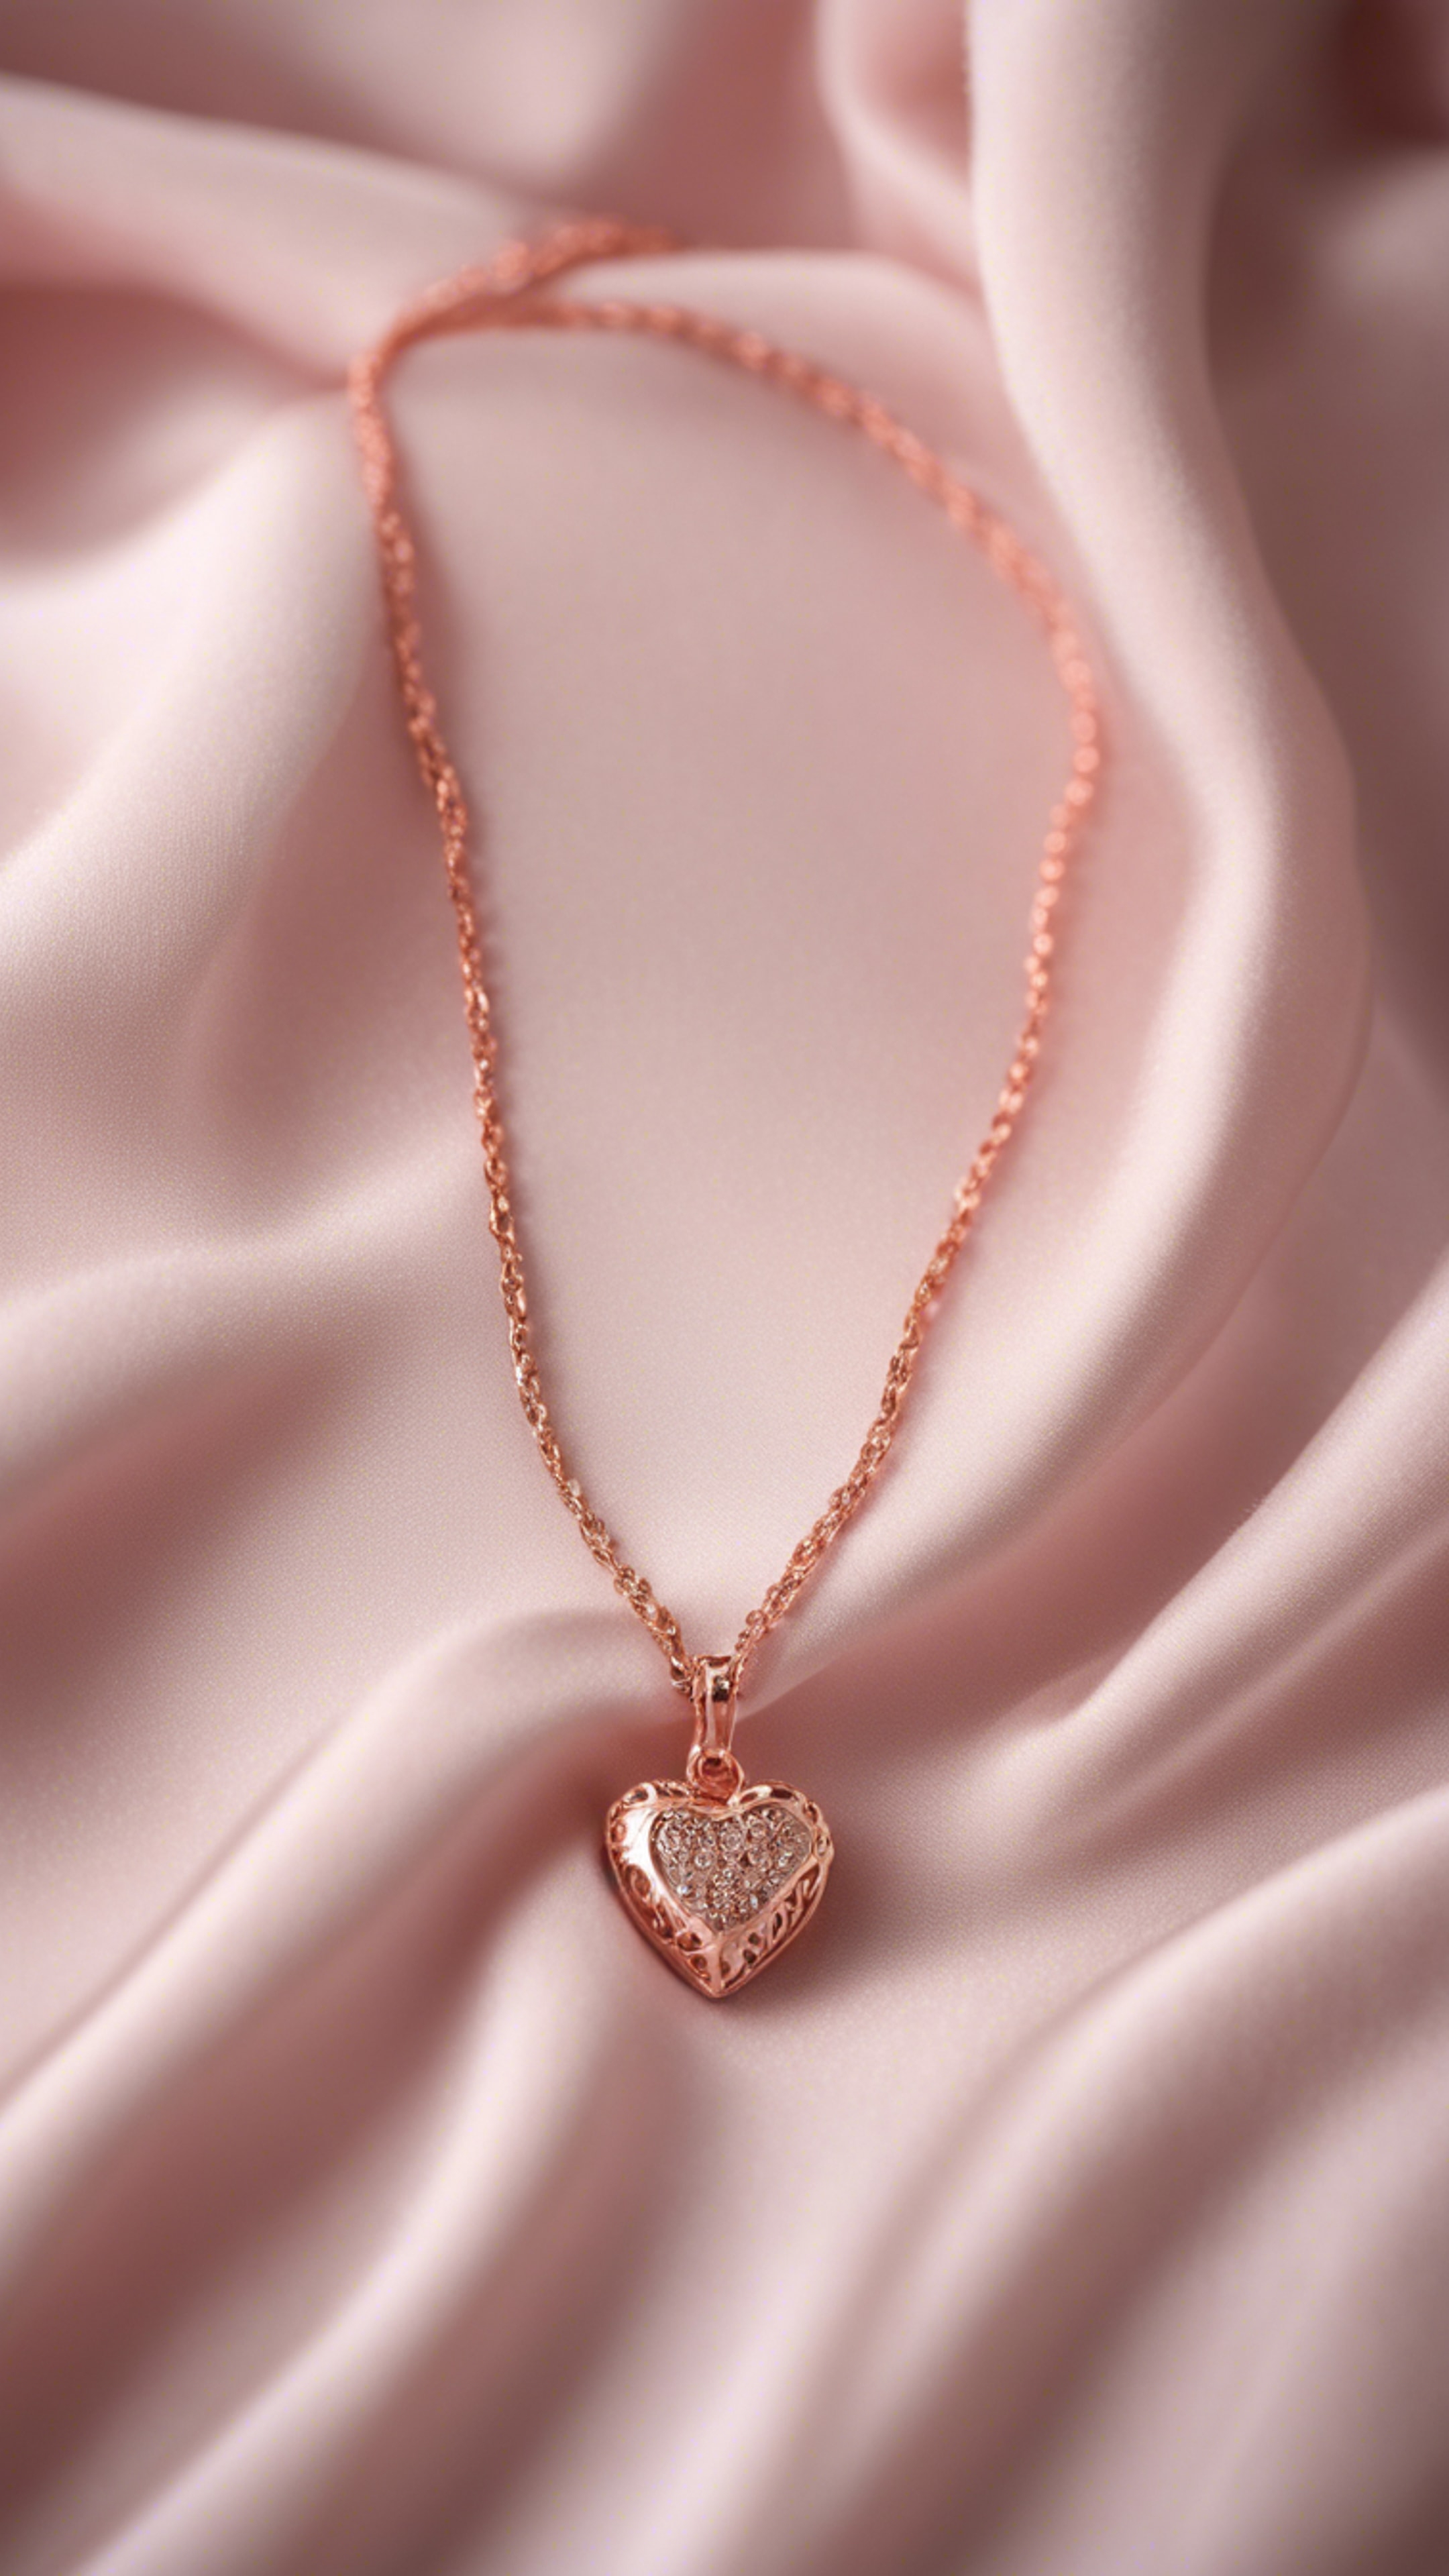 A delicate rose gold chain necklace with a small heart pendant, displayed on a soft pink satin fabric. Wallpaper[1bffd5f9a0f0499fae91]